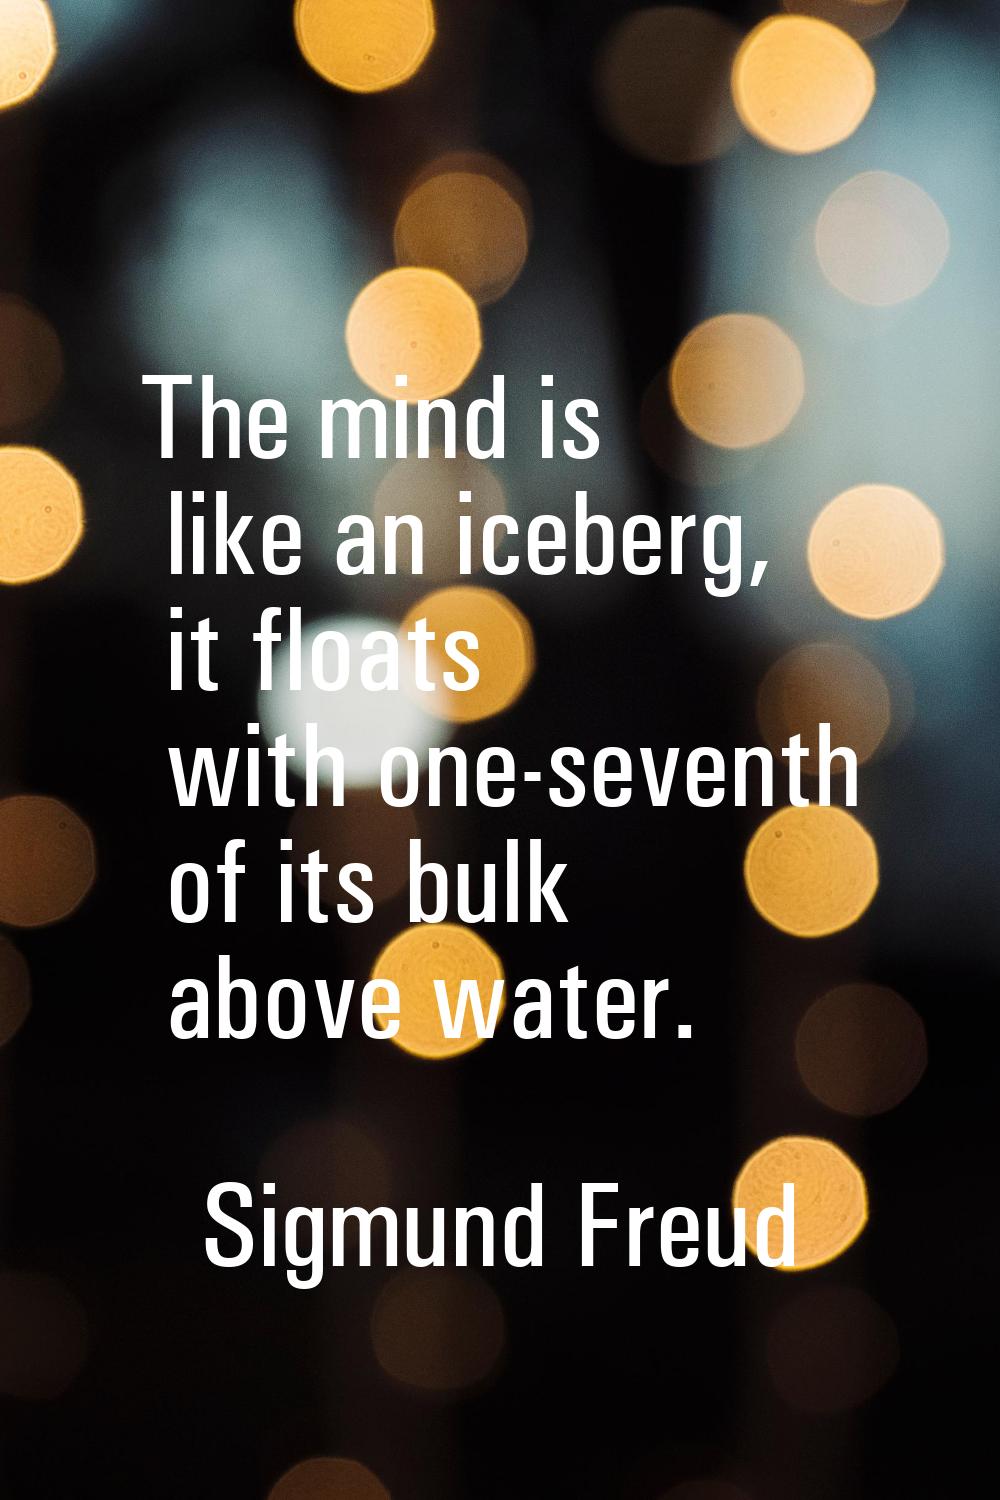 The mind is like an iceberg, it floats with one-seventh of its bulk above water.